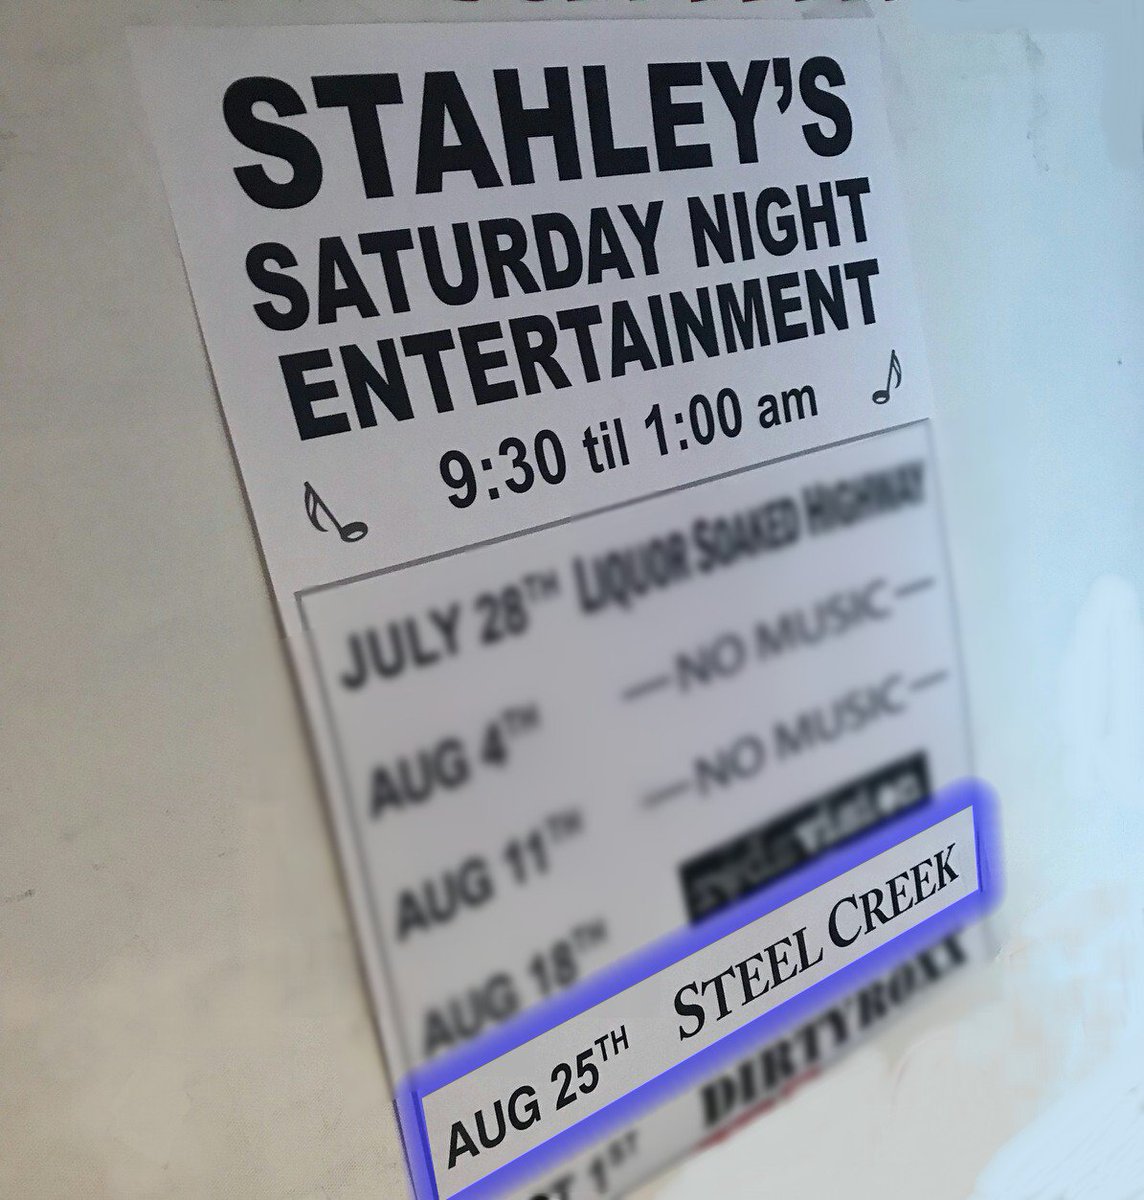 No need to worry about the weather this Saturday! We will be playing inside @ Stahleys from 9:30pm-1:00am. Great food & atmosphere here! Hope to see you! #SteelCreekBand #SCrockscountry #CountryBand #CountryMusic #LiveMusic #Music #Stahleys #AllentownPA #LehighValley #LineDancing